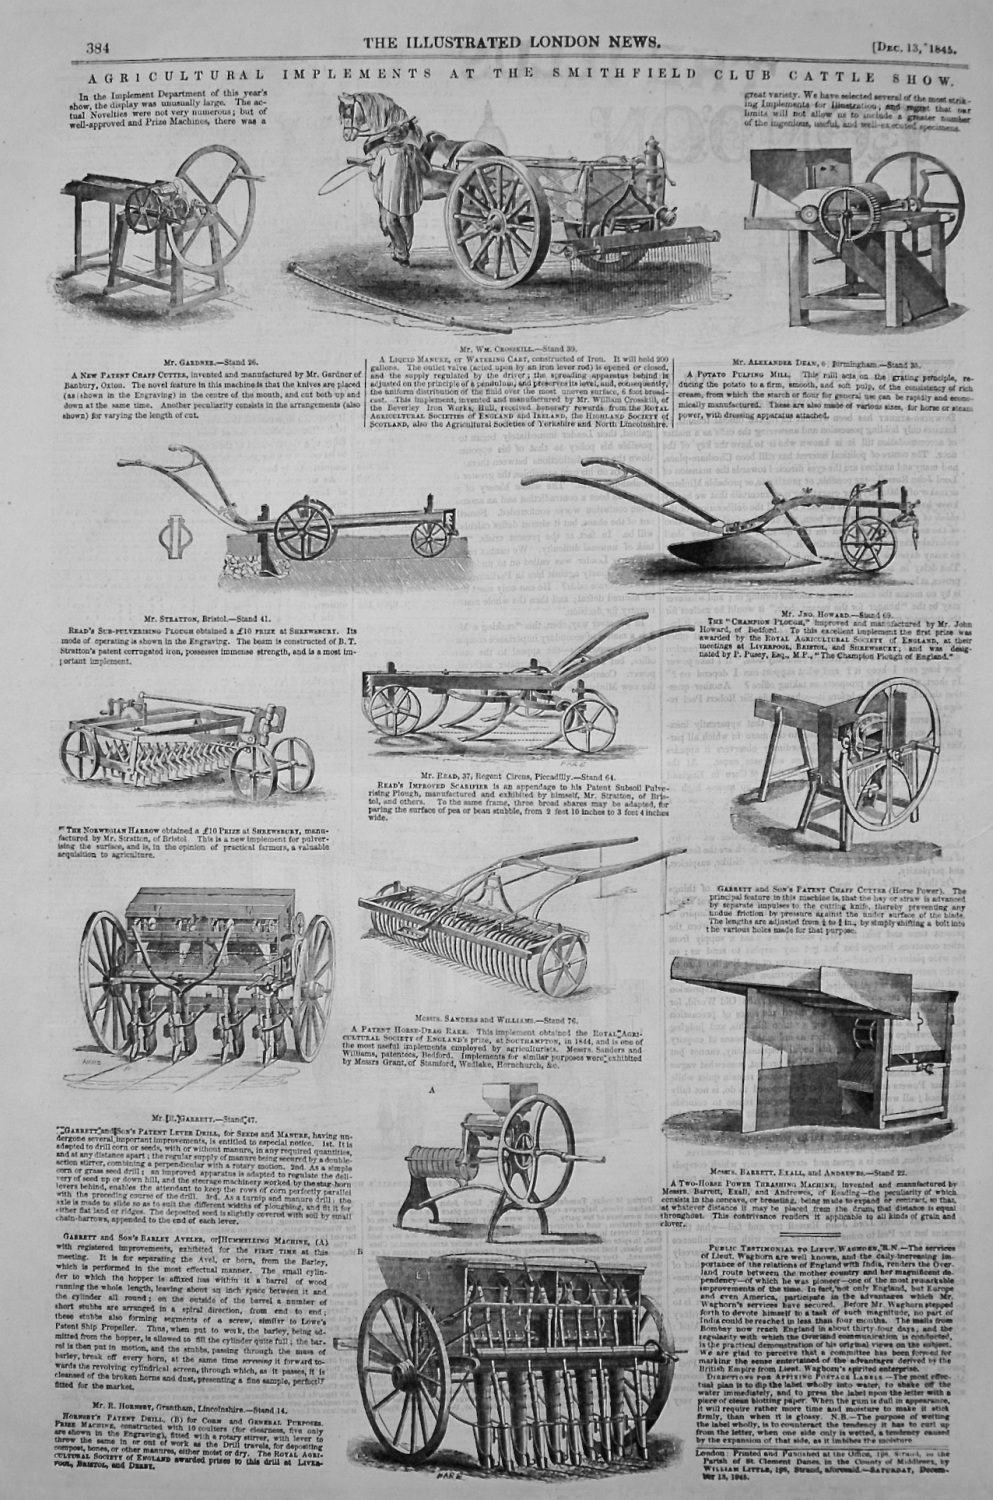 Agricultural Implements at the Smithfield Club Cattle Show. 1845